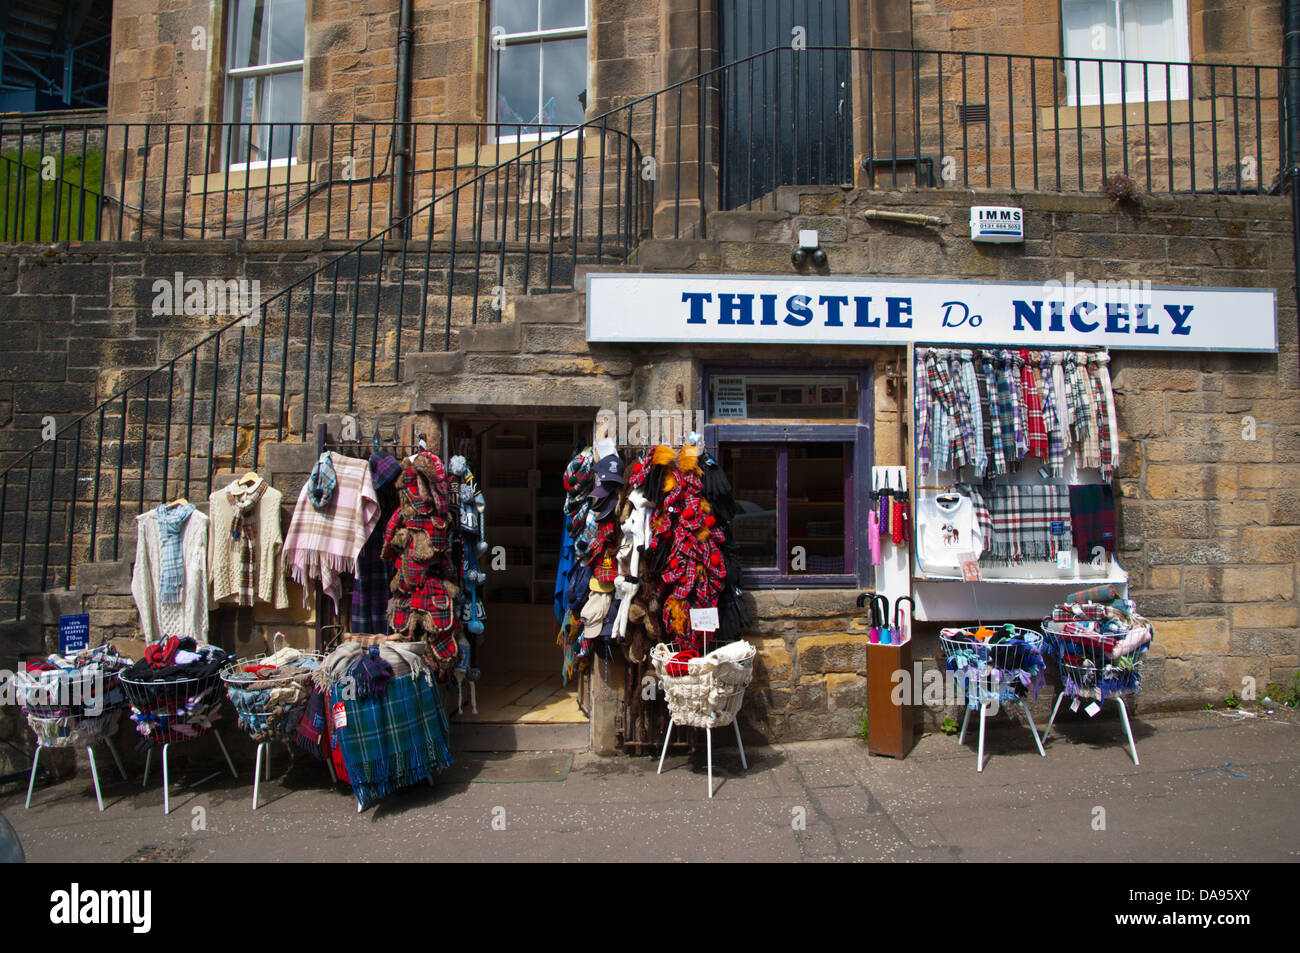 Shop selling woolen clothing and accessories old town Edinburgh Scotland Britain UK Europe Stock Photo